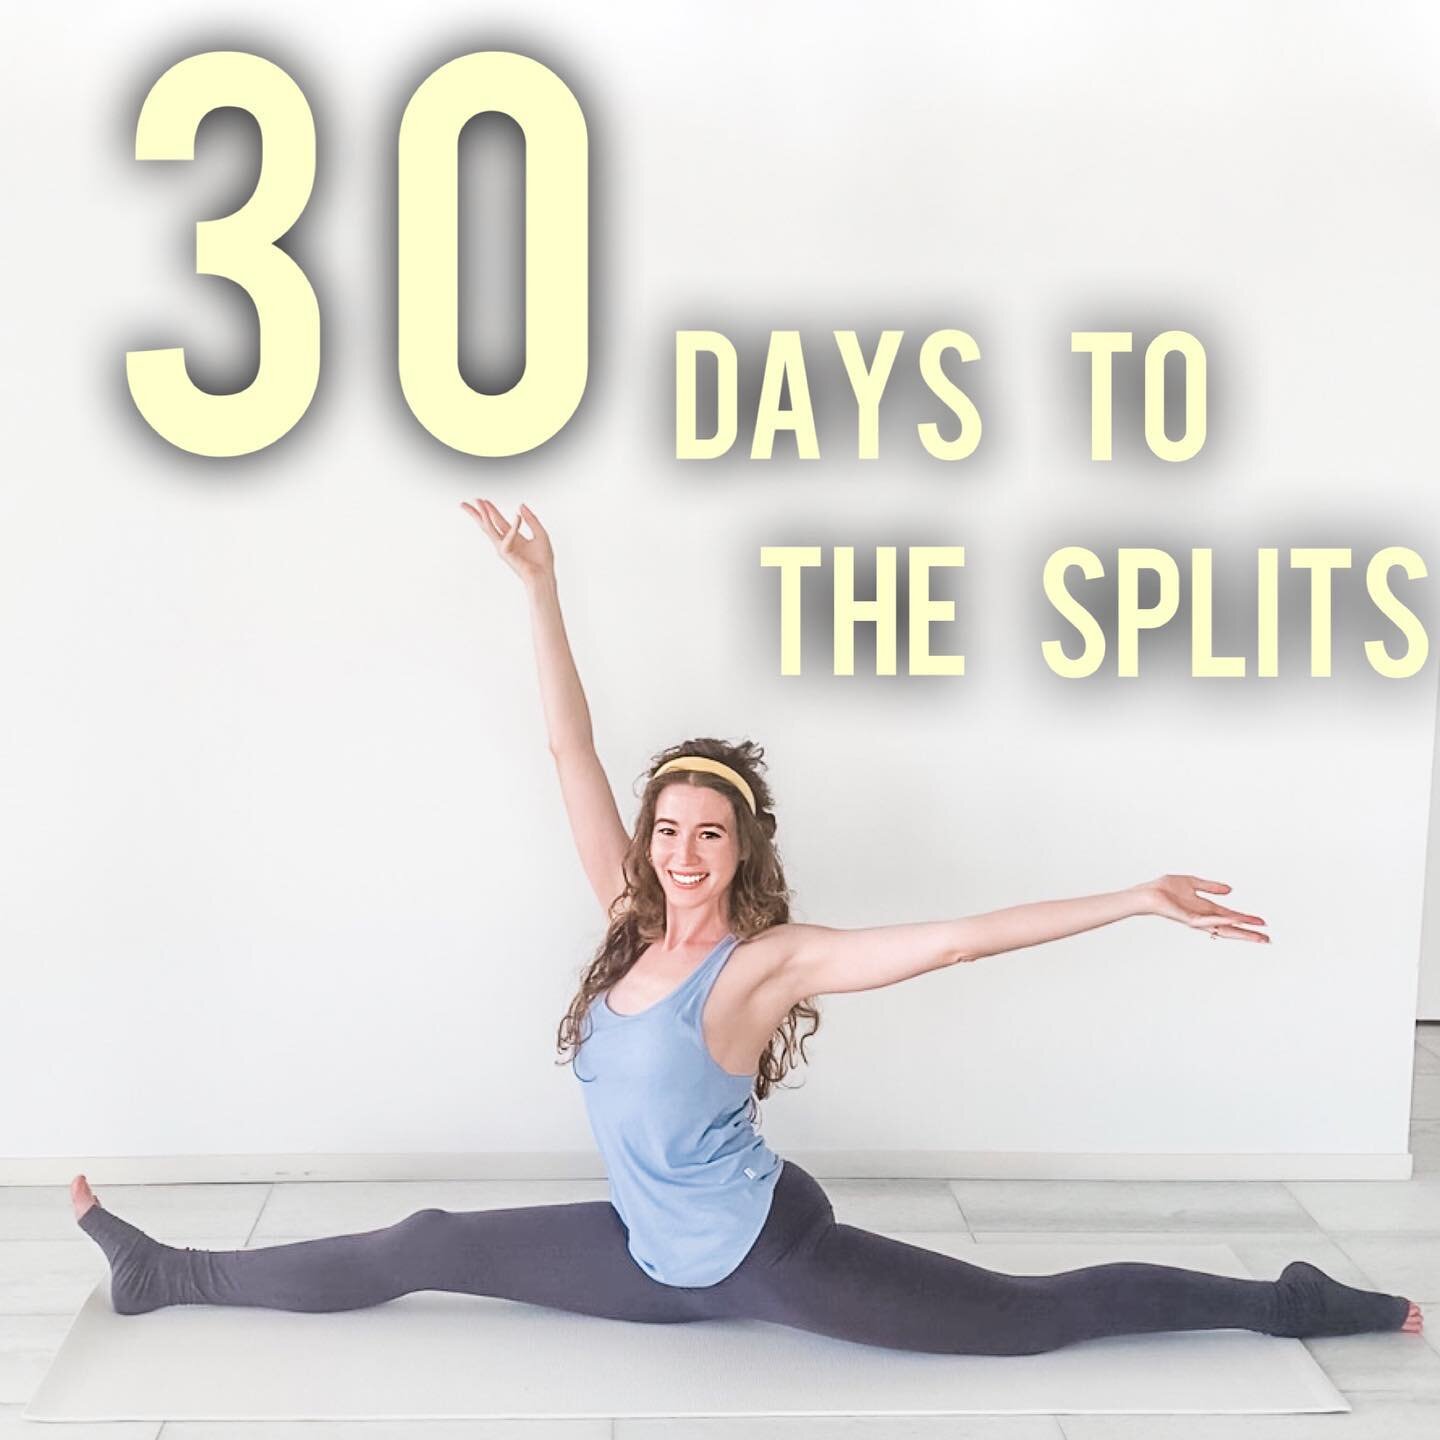 MINI TRAINING ⭐️ How to Do Go From Tight to the Splits in 30 days 😲⁣
⁣
Do you ever feel defeated scrolling through instagram seeing beautiful, but totally impossible-looking yoga poses? 😩 ⁣
⁣
&ldquo;How can these people do magic, and why am I not o